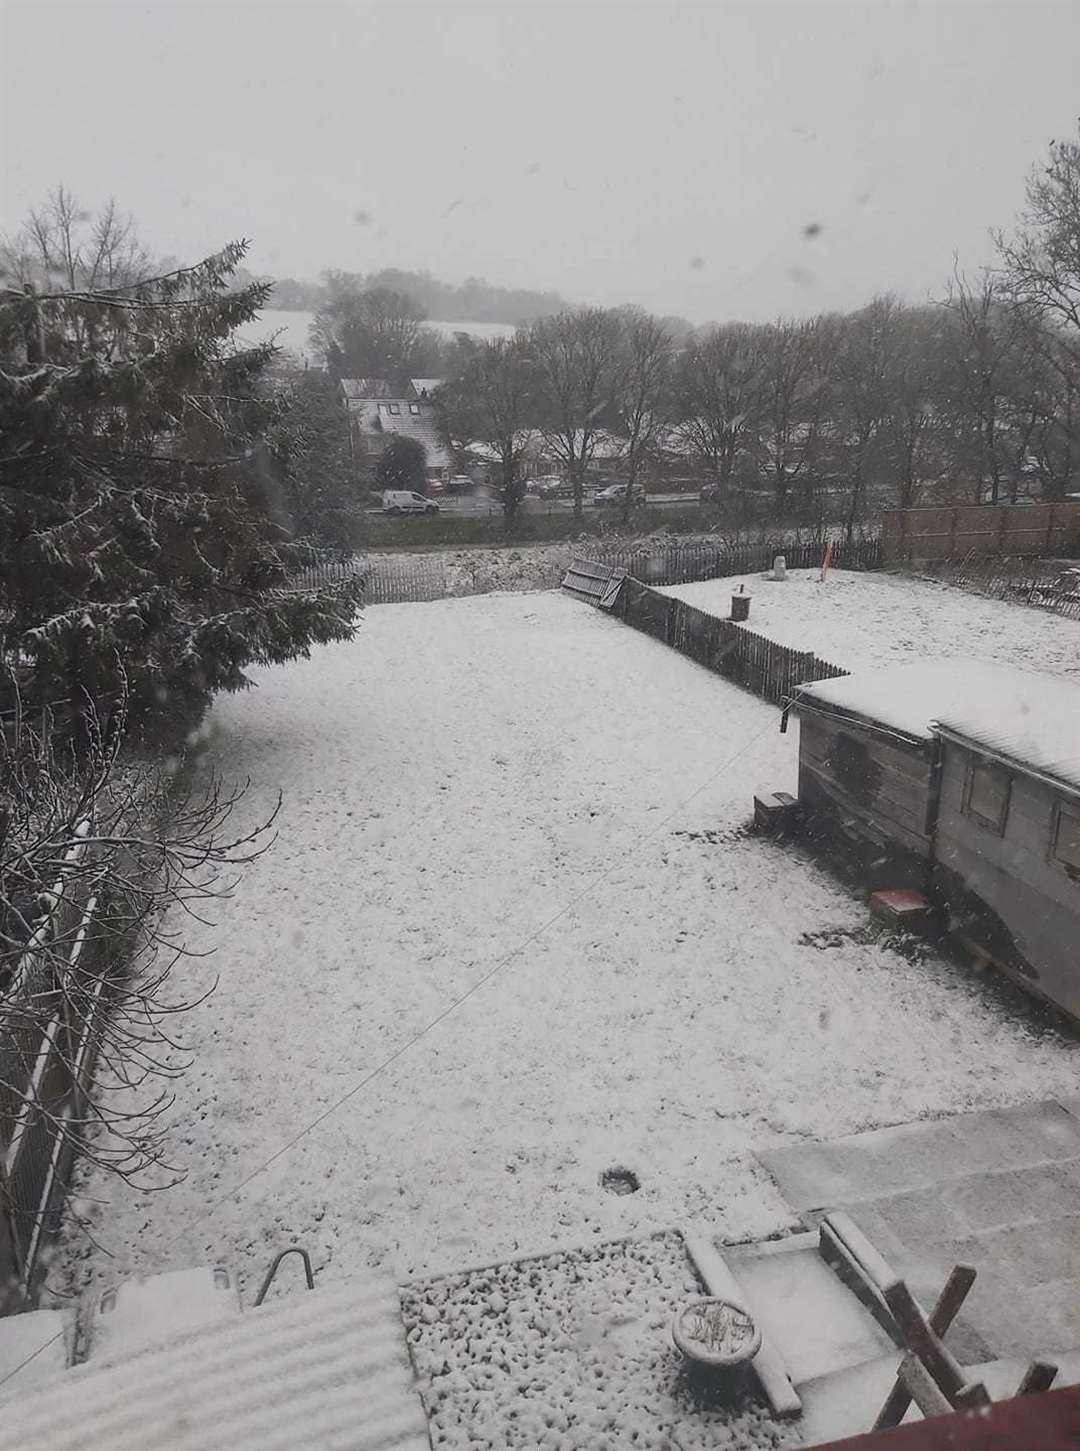 Emma Edwards shared this picture on our Facebook page of the snow in Barham